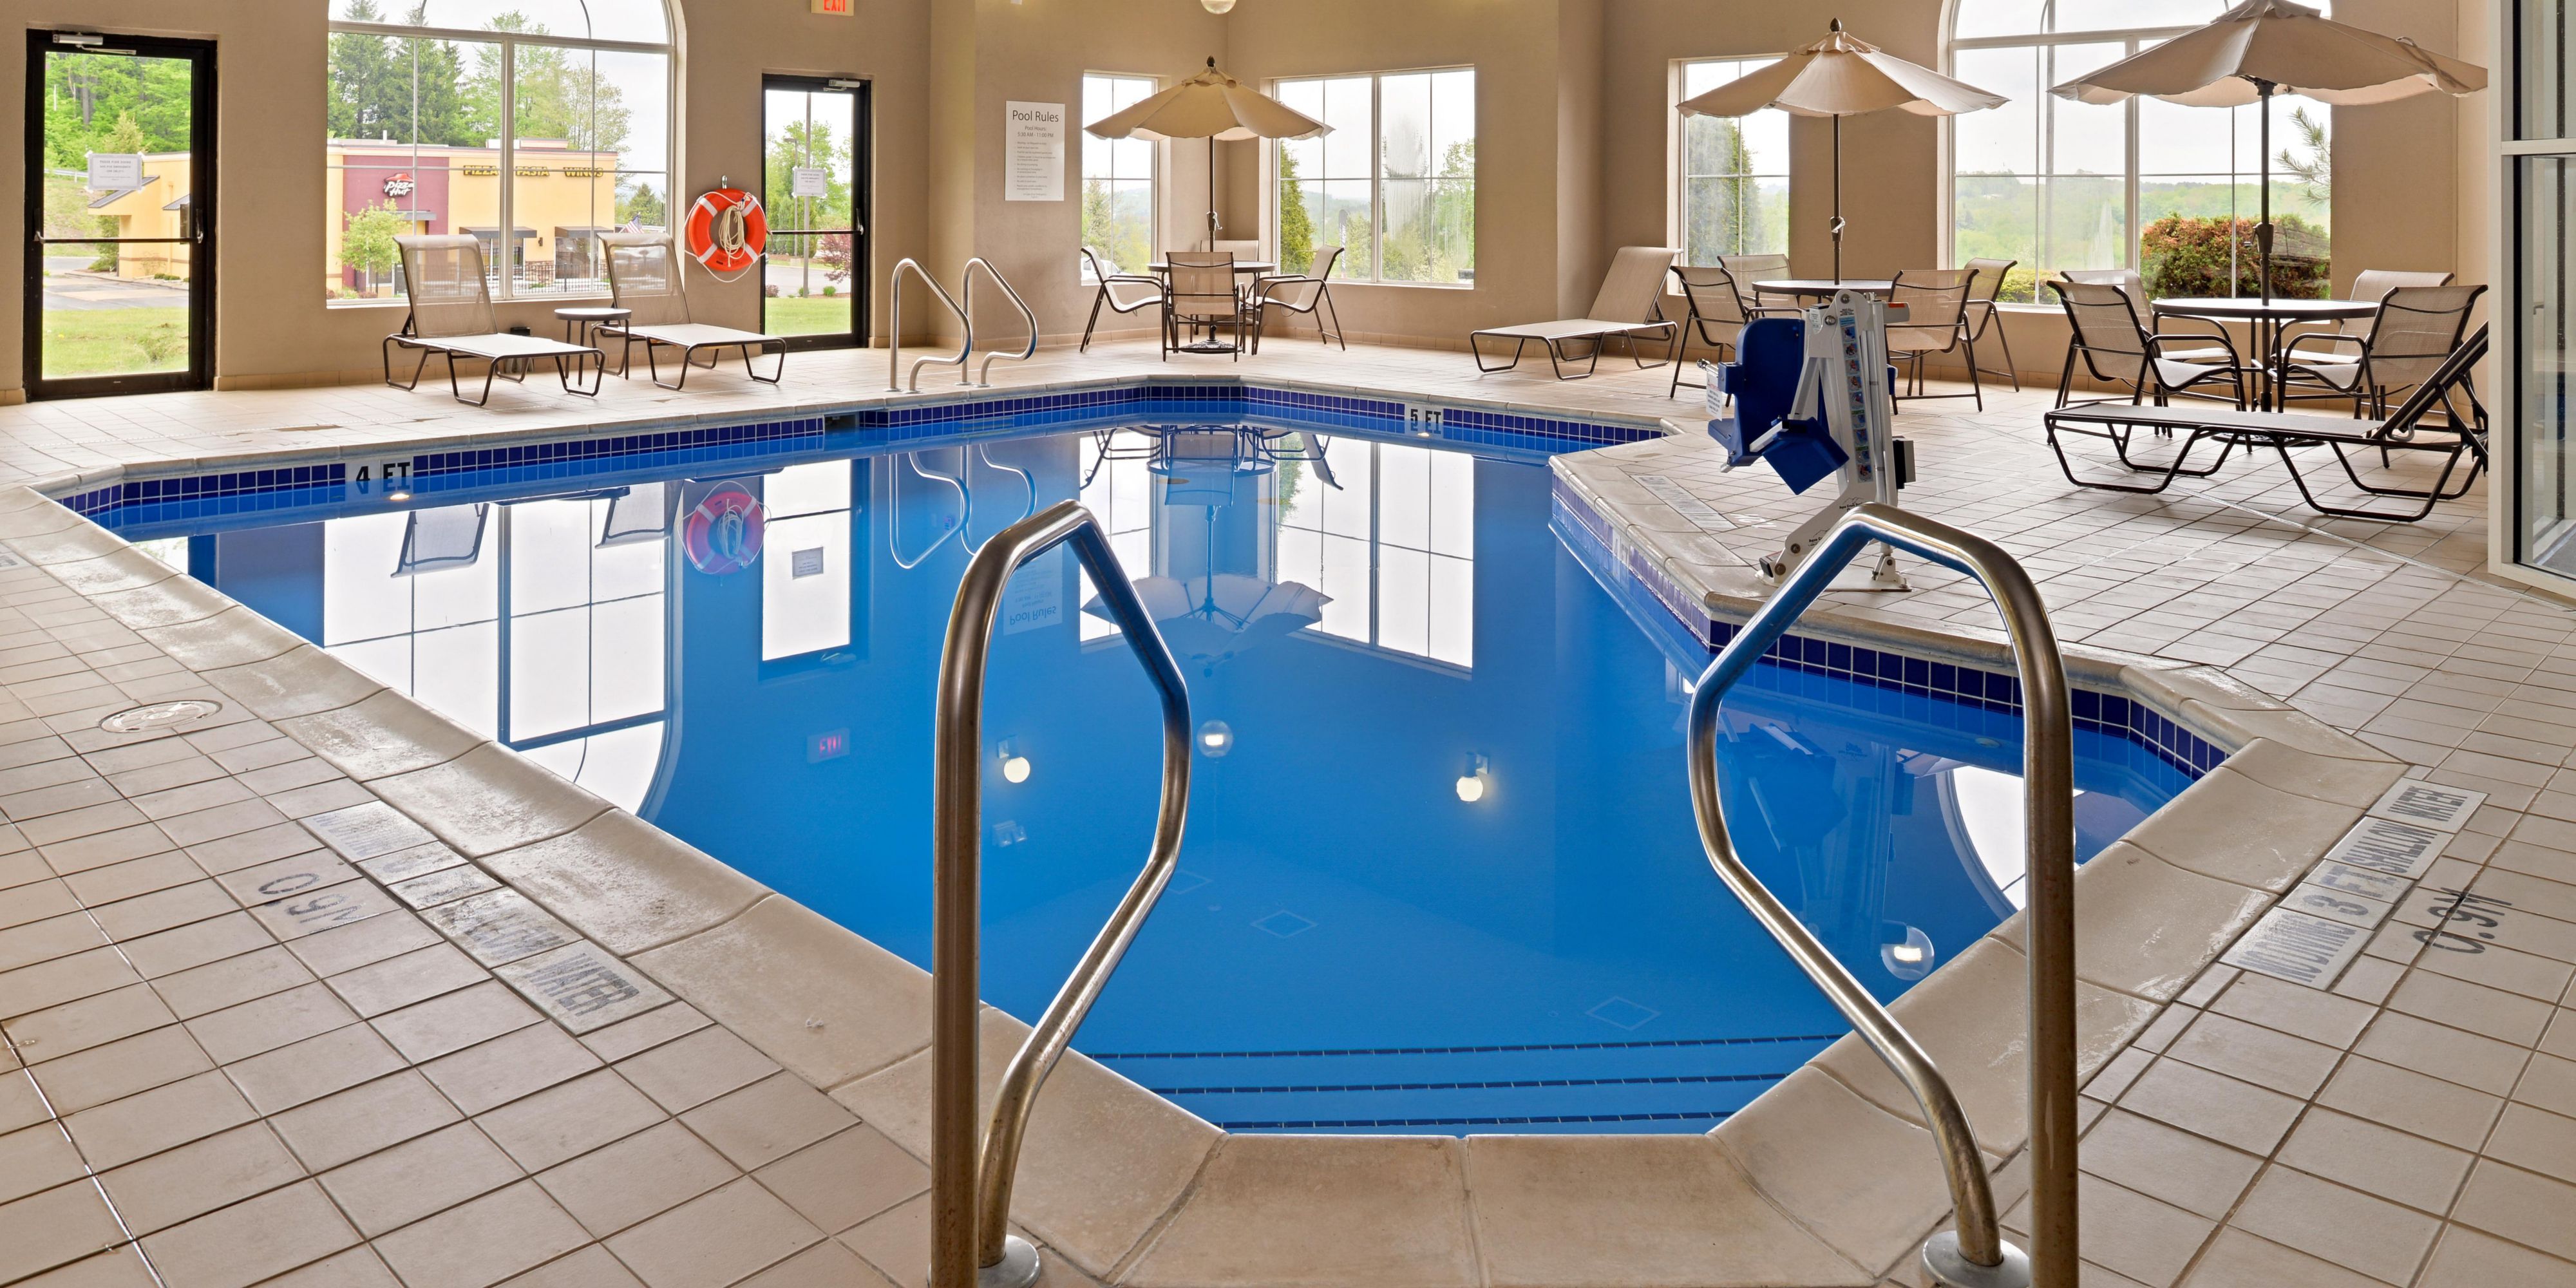 We have an indoor heated pool. Swimming from 7am until 11pm every night, even when it is snowing outside. 